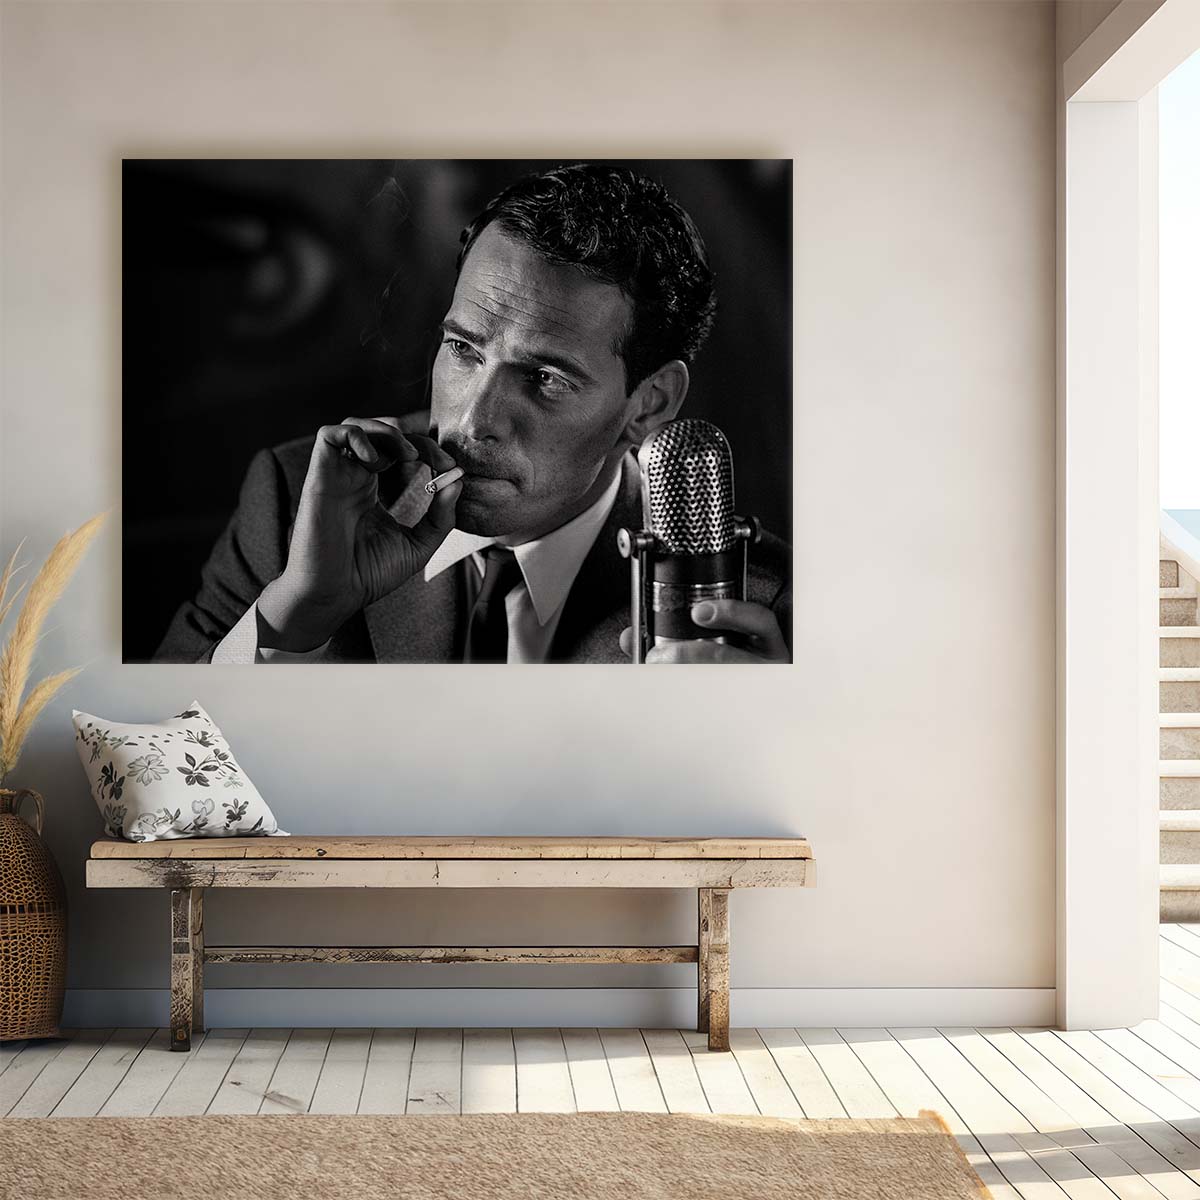 Vintage Cinematic Smoker Portrait in Monochrome by Peter Muller Wall Art